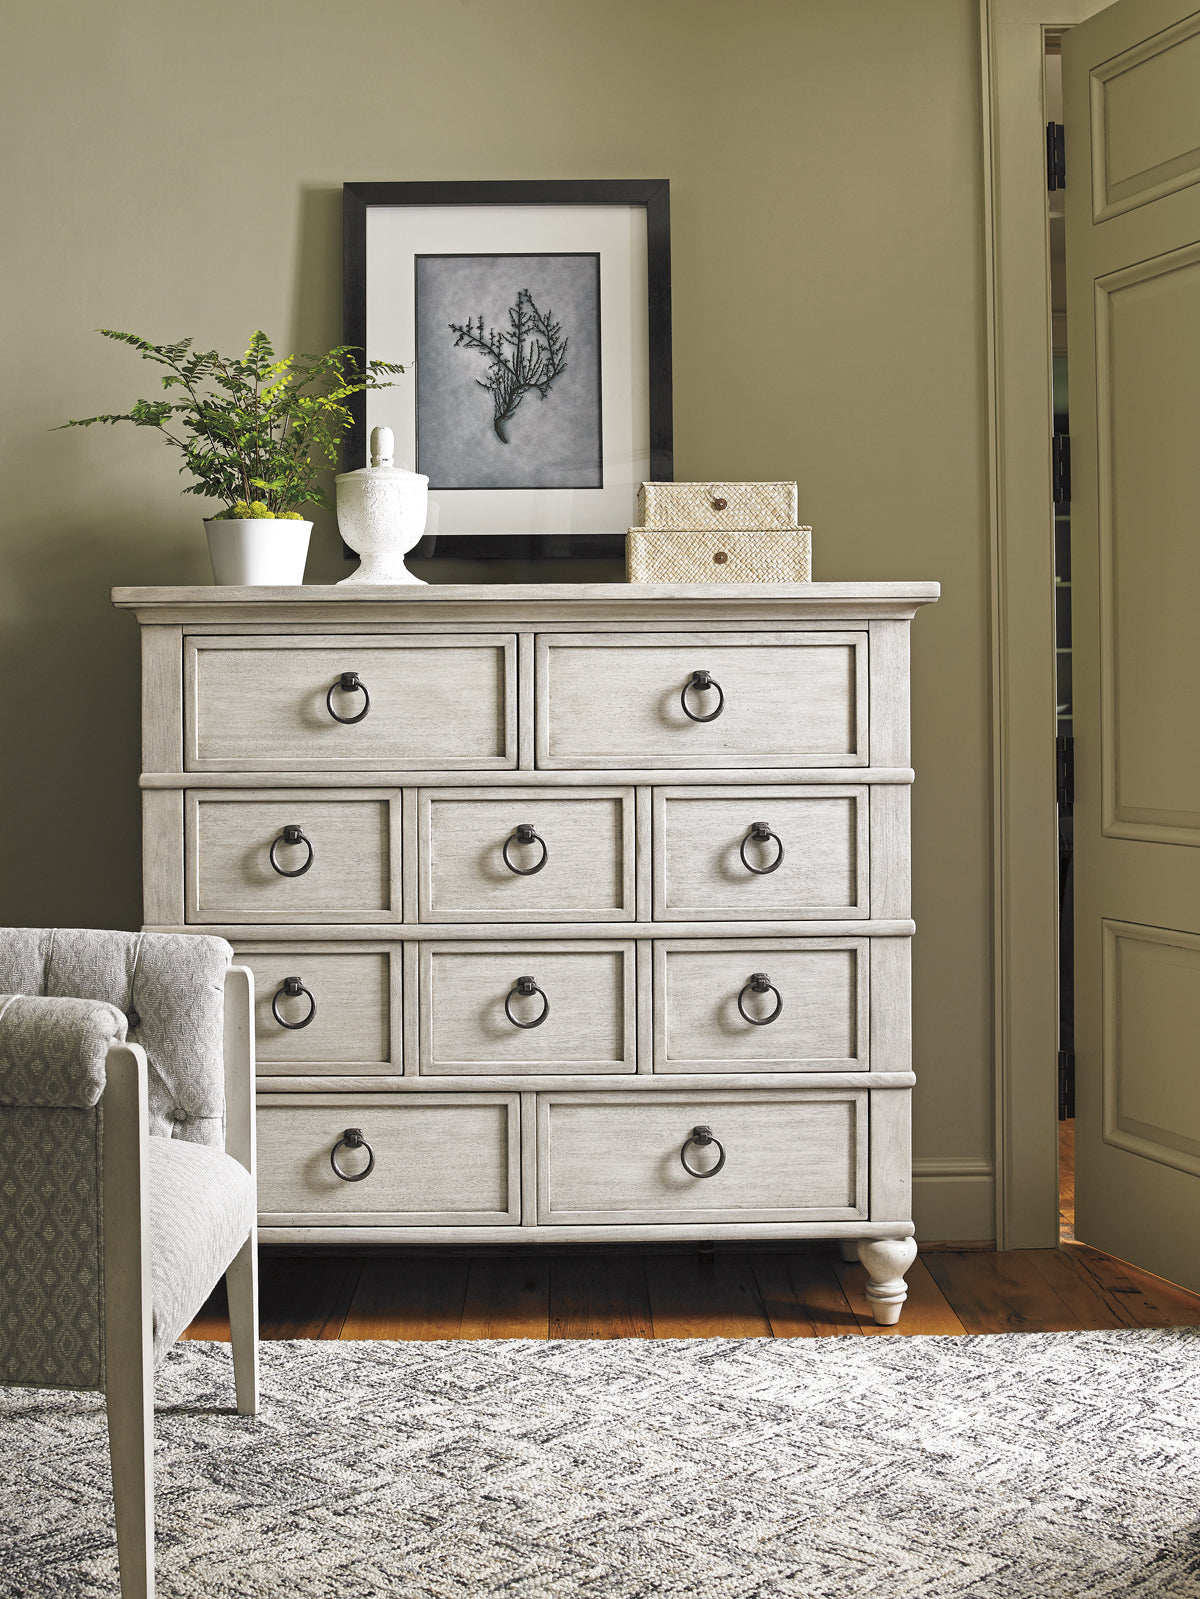 Fall River Drawer Chest